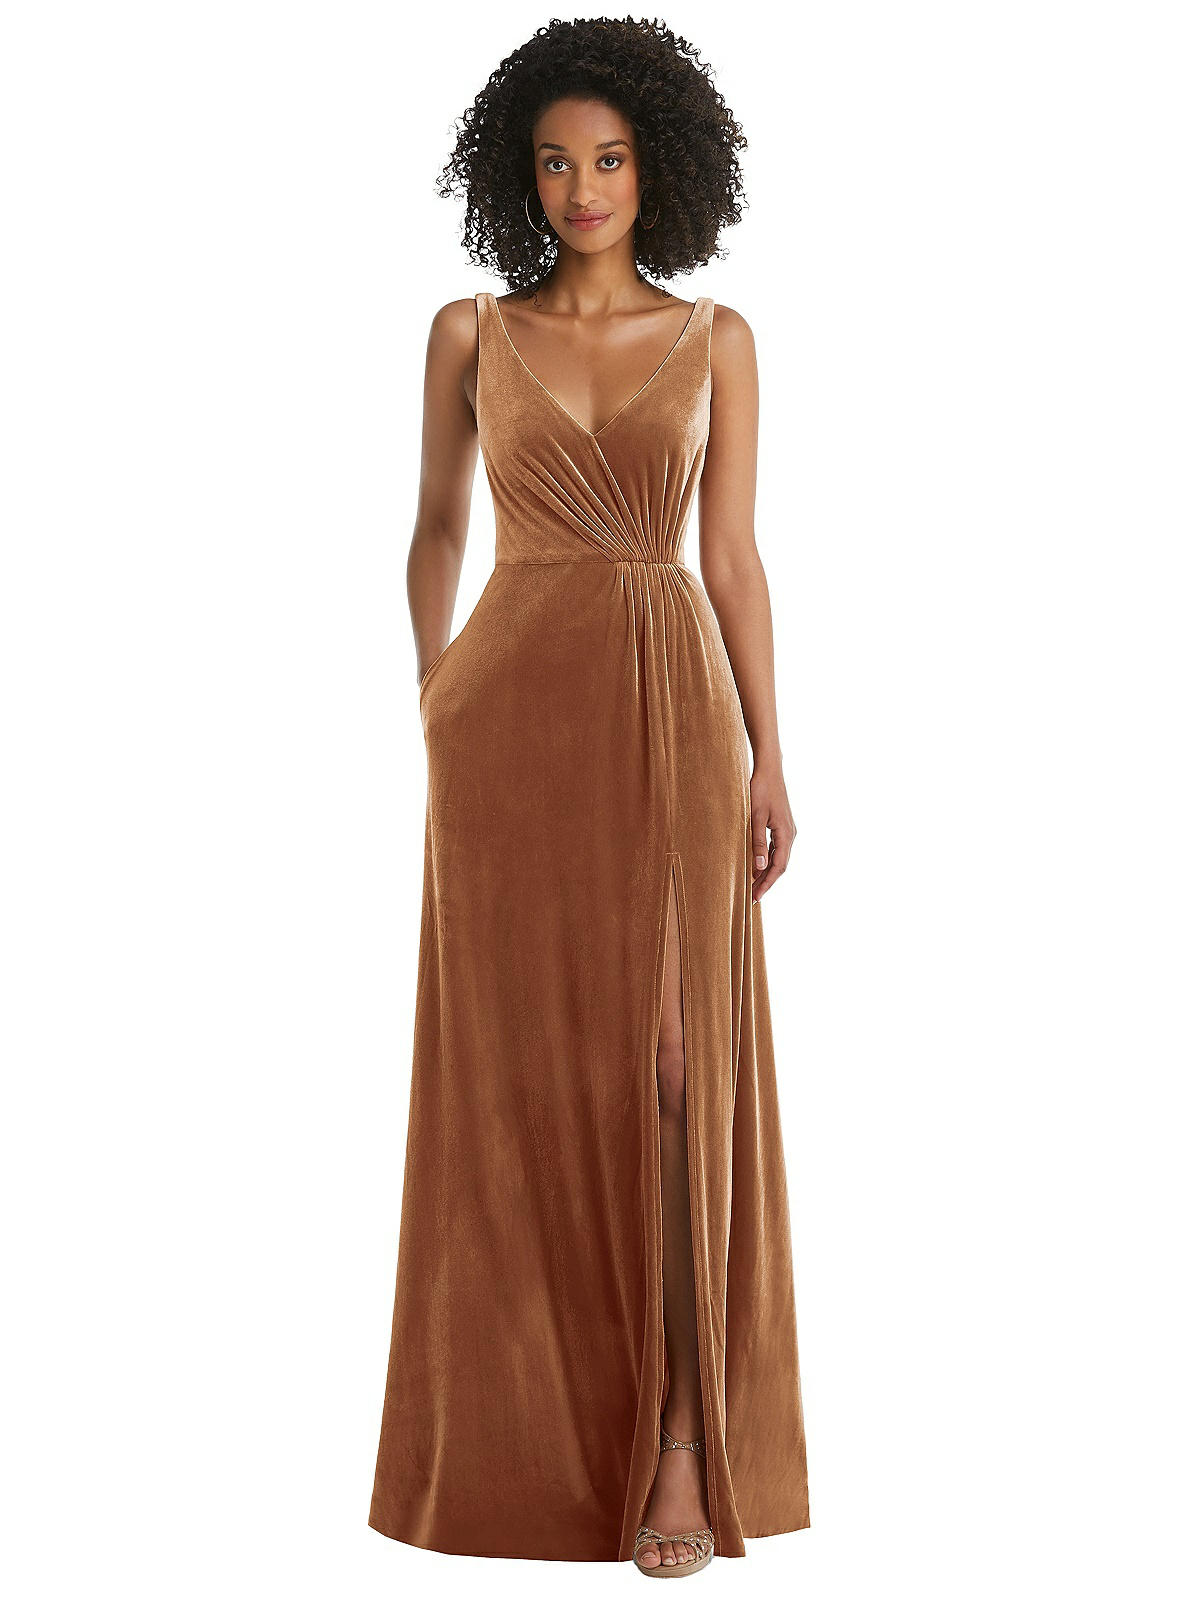 Velvet Maxi Bridesmaid Dress With Shirred Bodice And Front Slit In